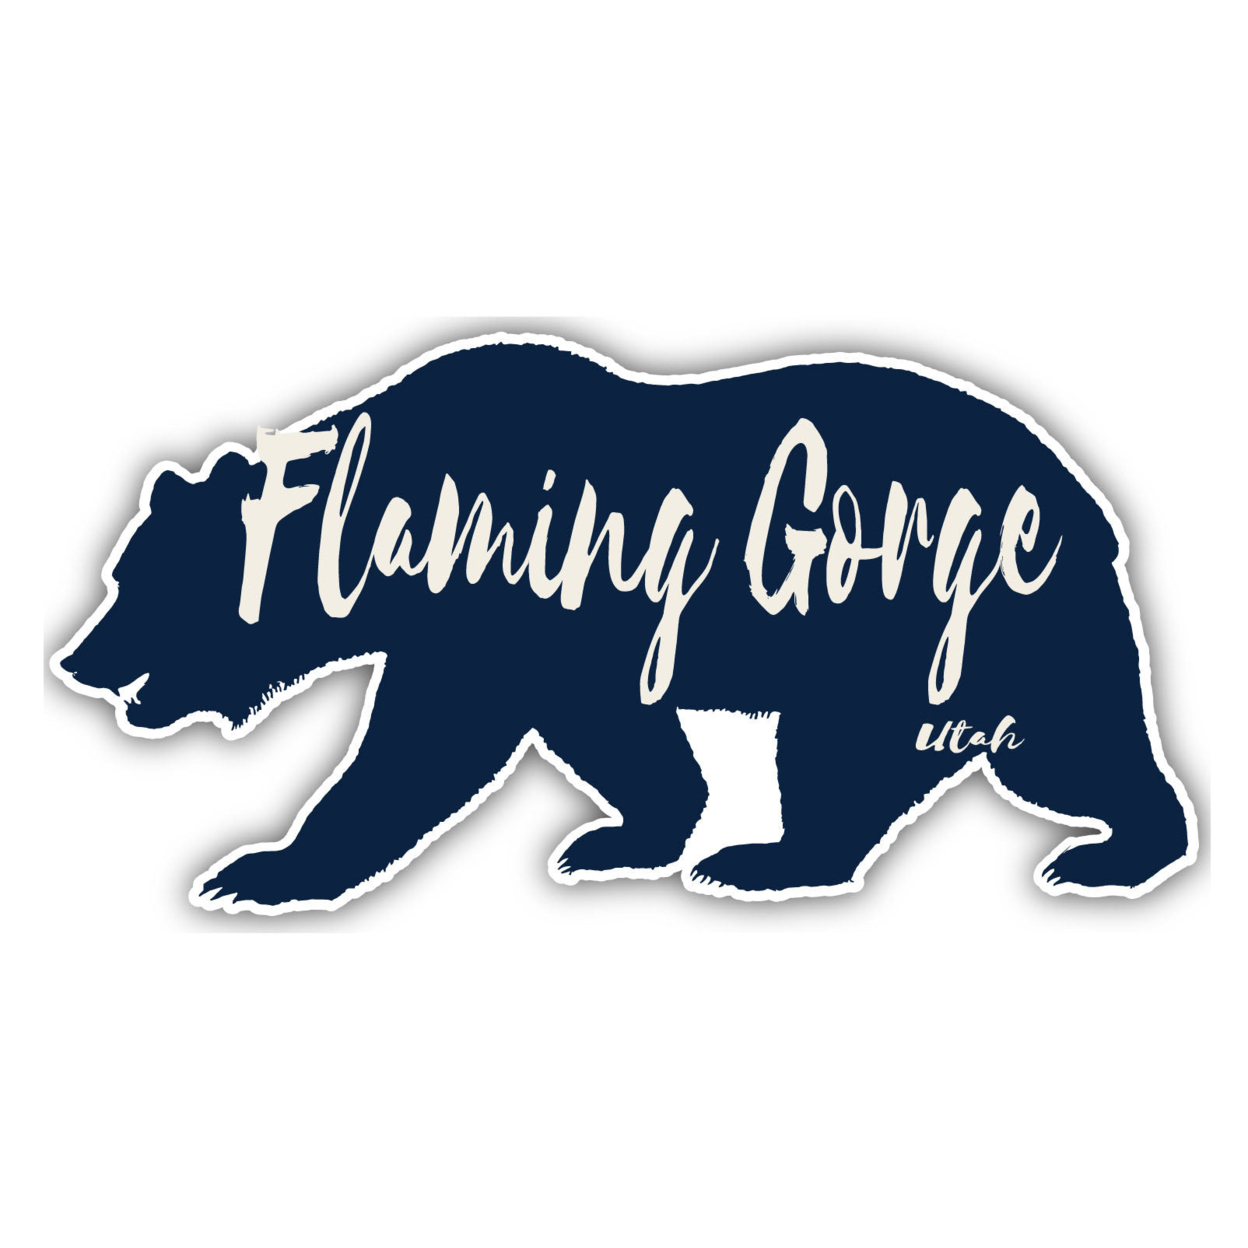 Flaming Gorge Utah Souvenir Decorative Stickers (Choose Theme And Size) - 4-Pack, 12-Inch, Bear